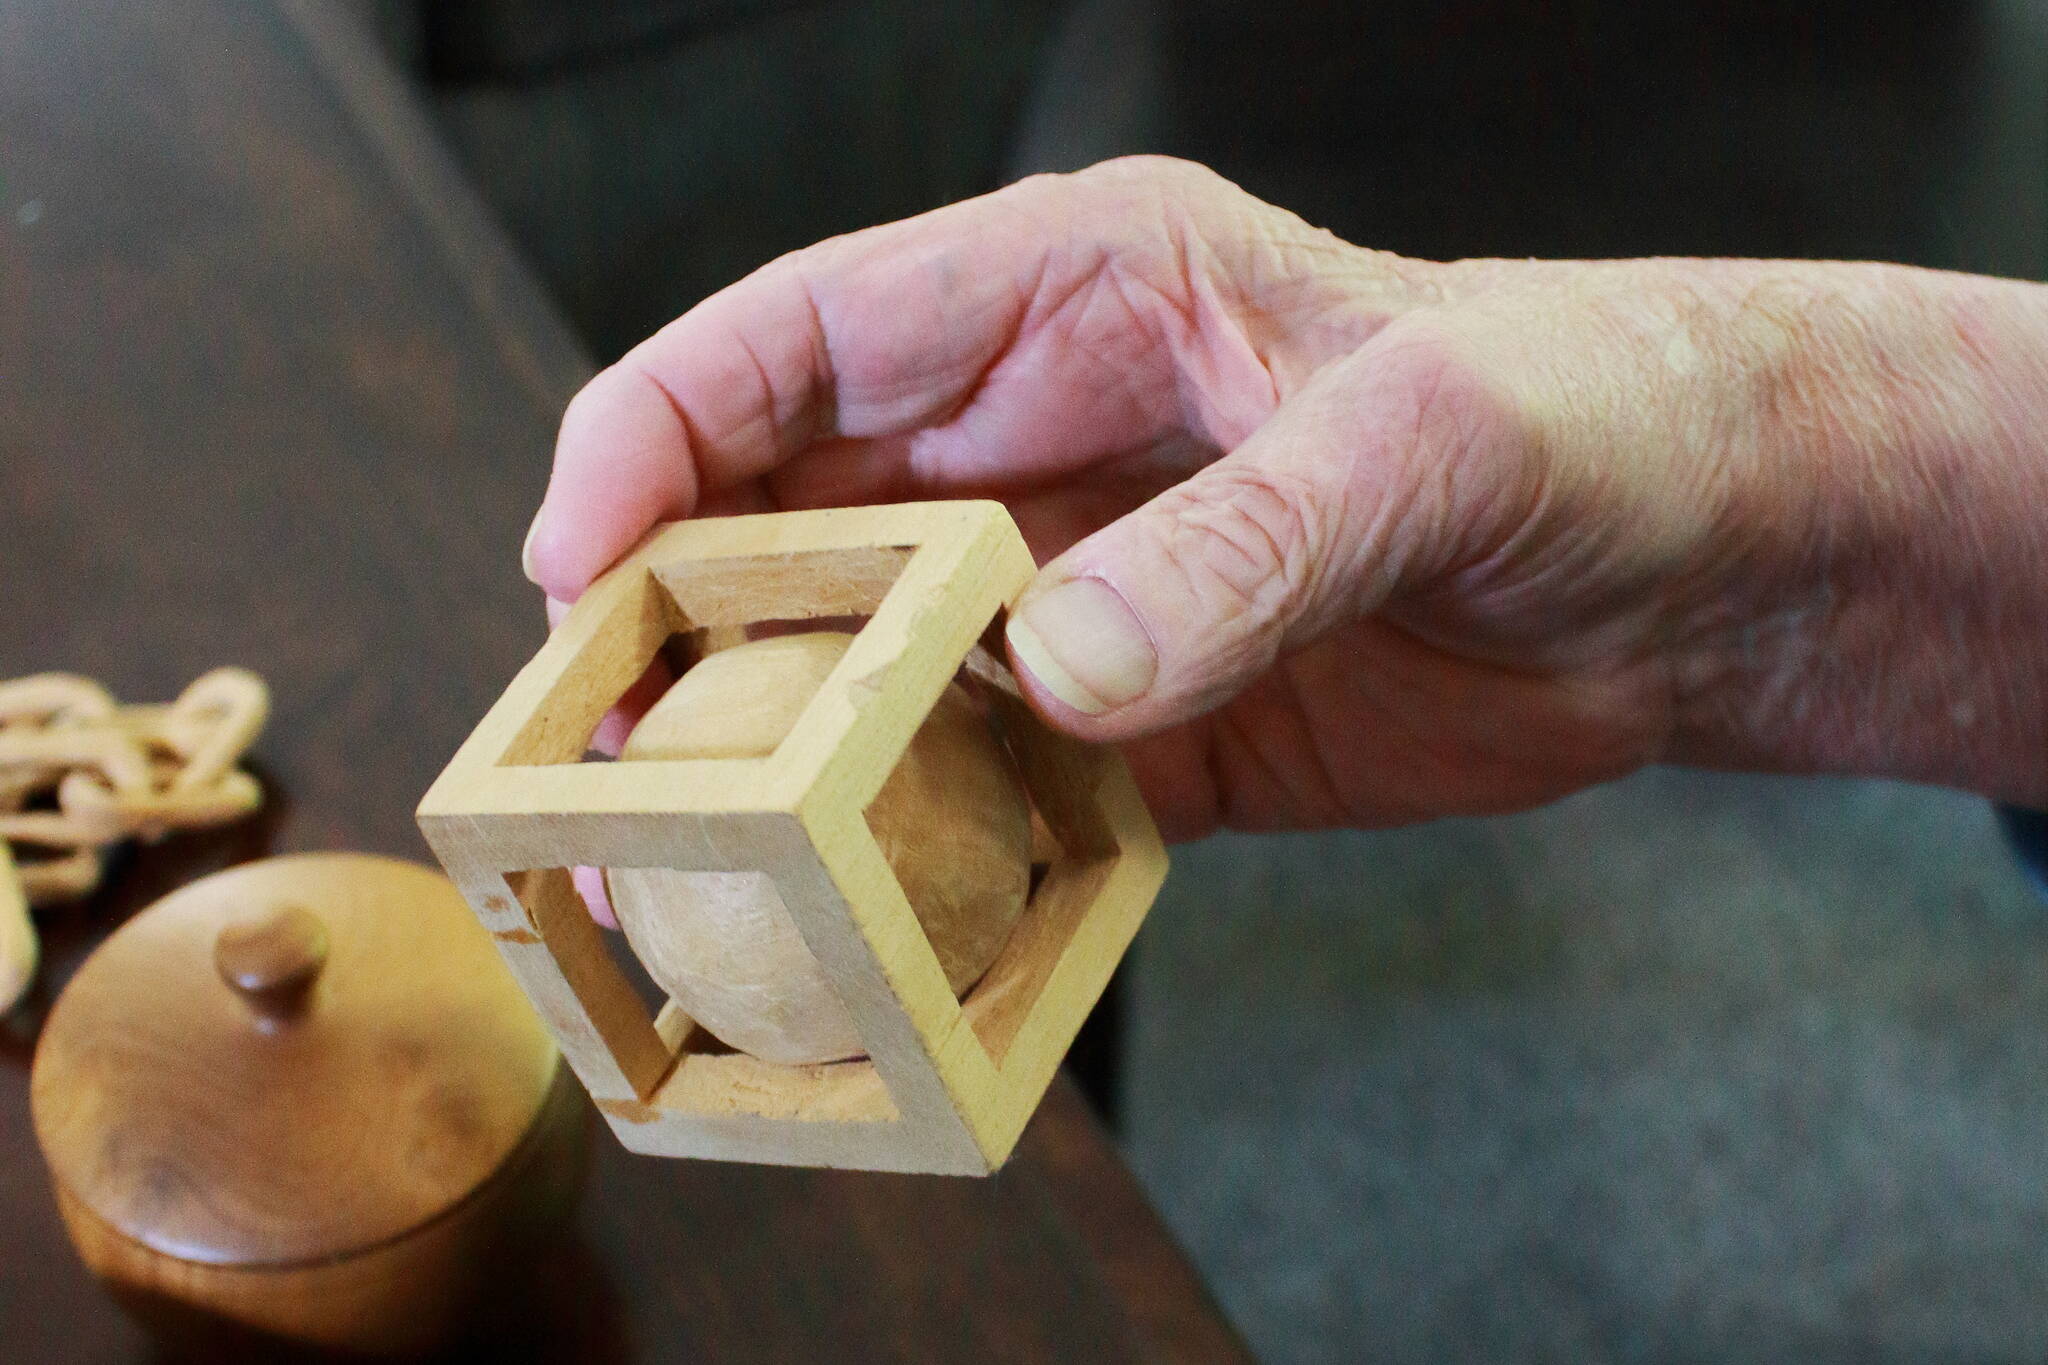 Artist Dick Ode said he has enjoyed working with wood since he was a young, and used it as a way to pass the time while traveling for work. This wooden ball and cube were whittled at the same time from the same solid block. Photo by Keelin Everly-Lang / The Mirror